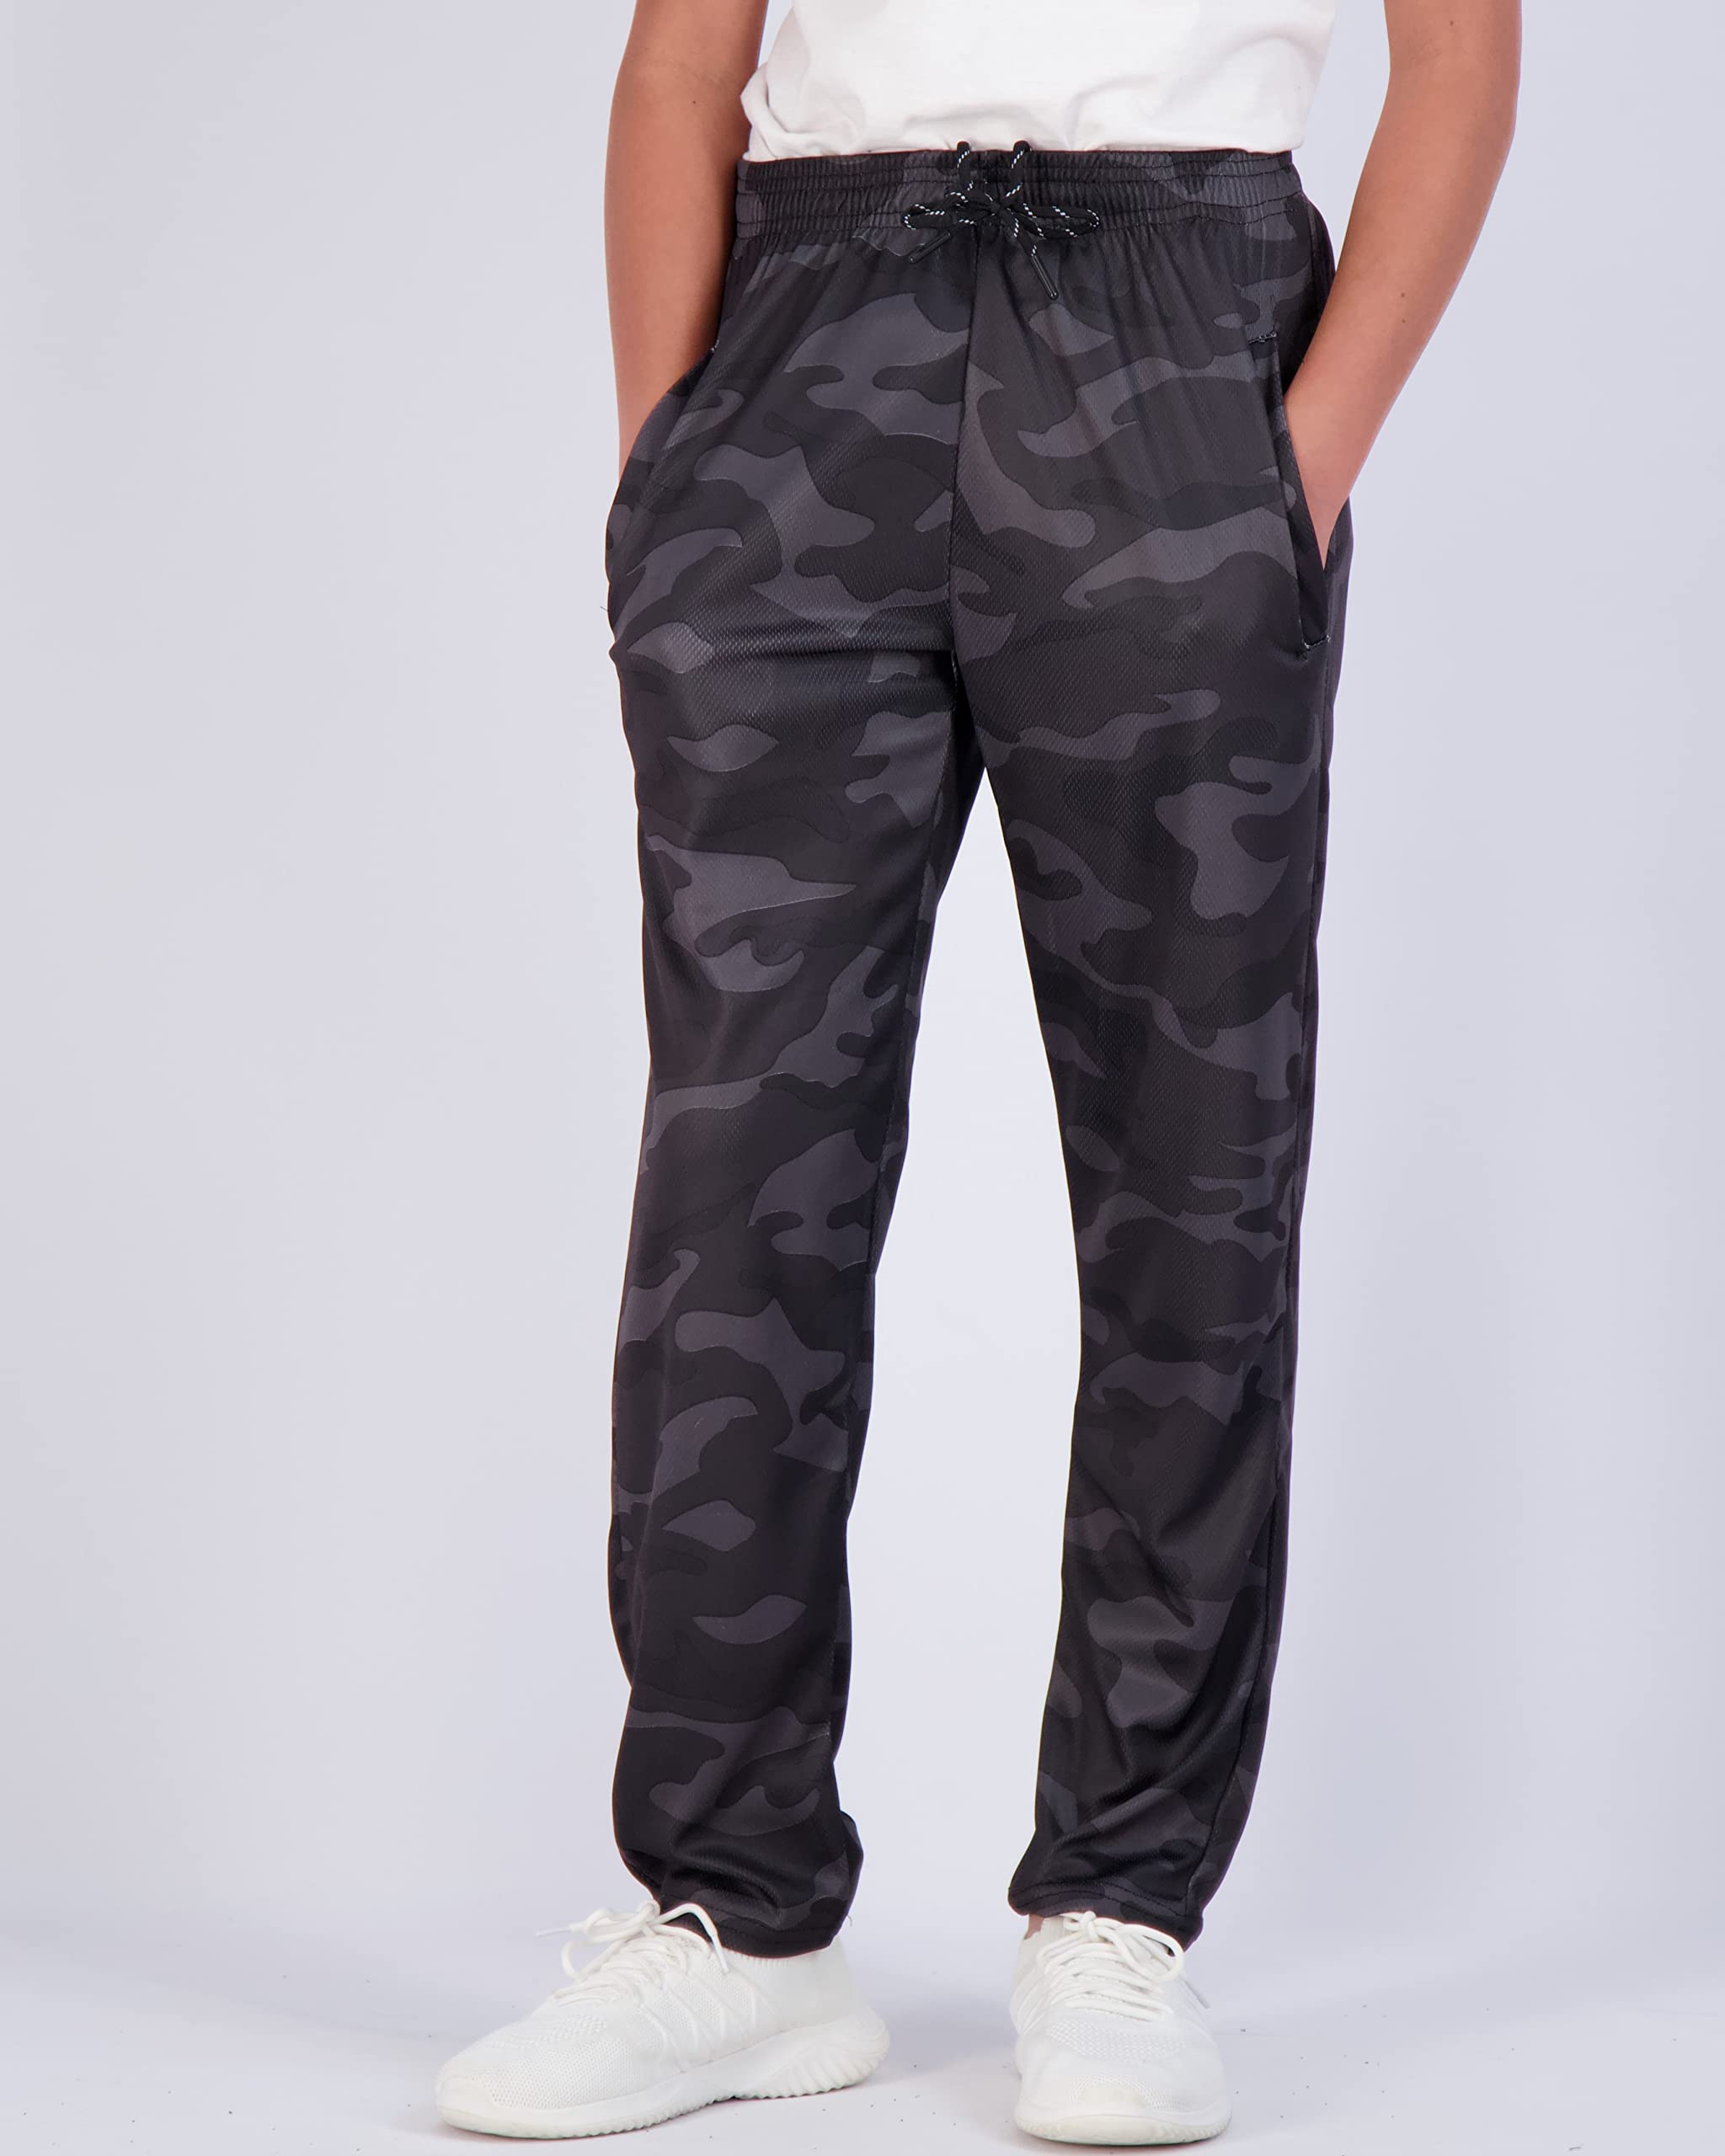 Real Essentials 3 Pack: Boys' Mesh Open Bottom Active Sweatpants with Pockets & Drawstring